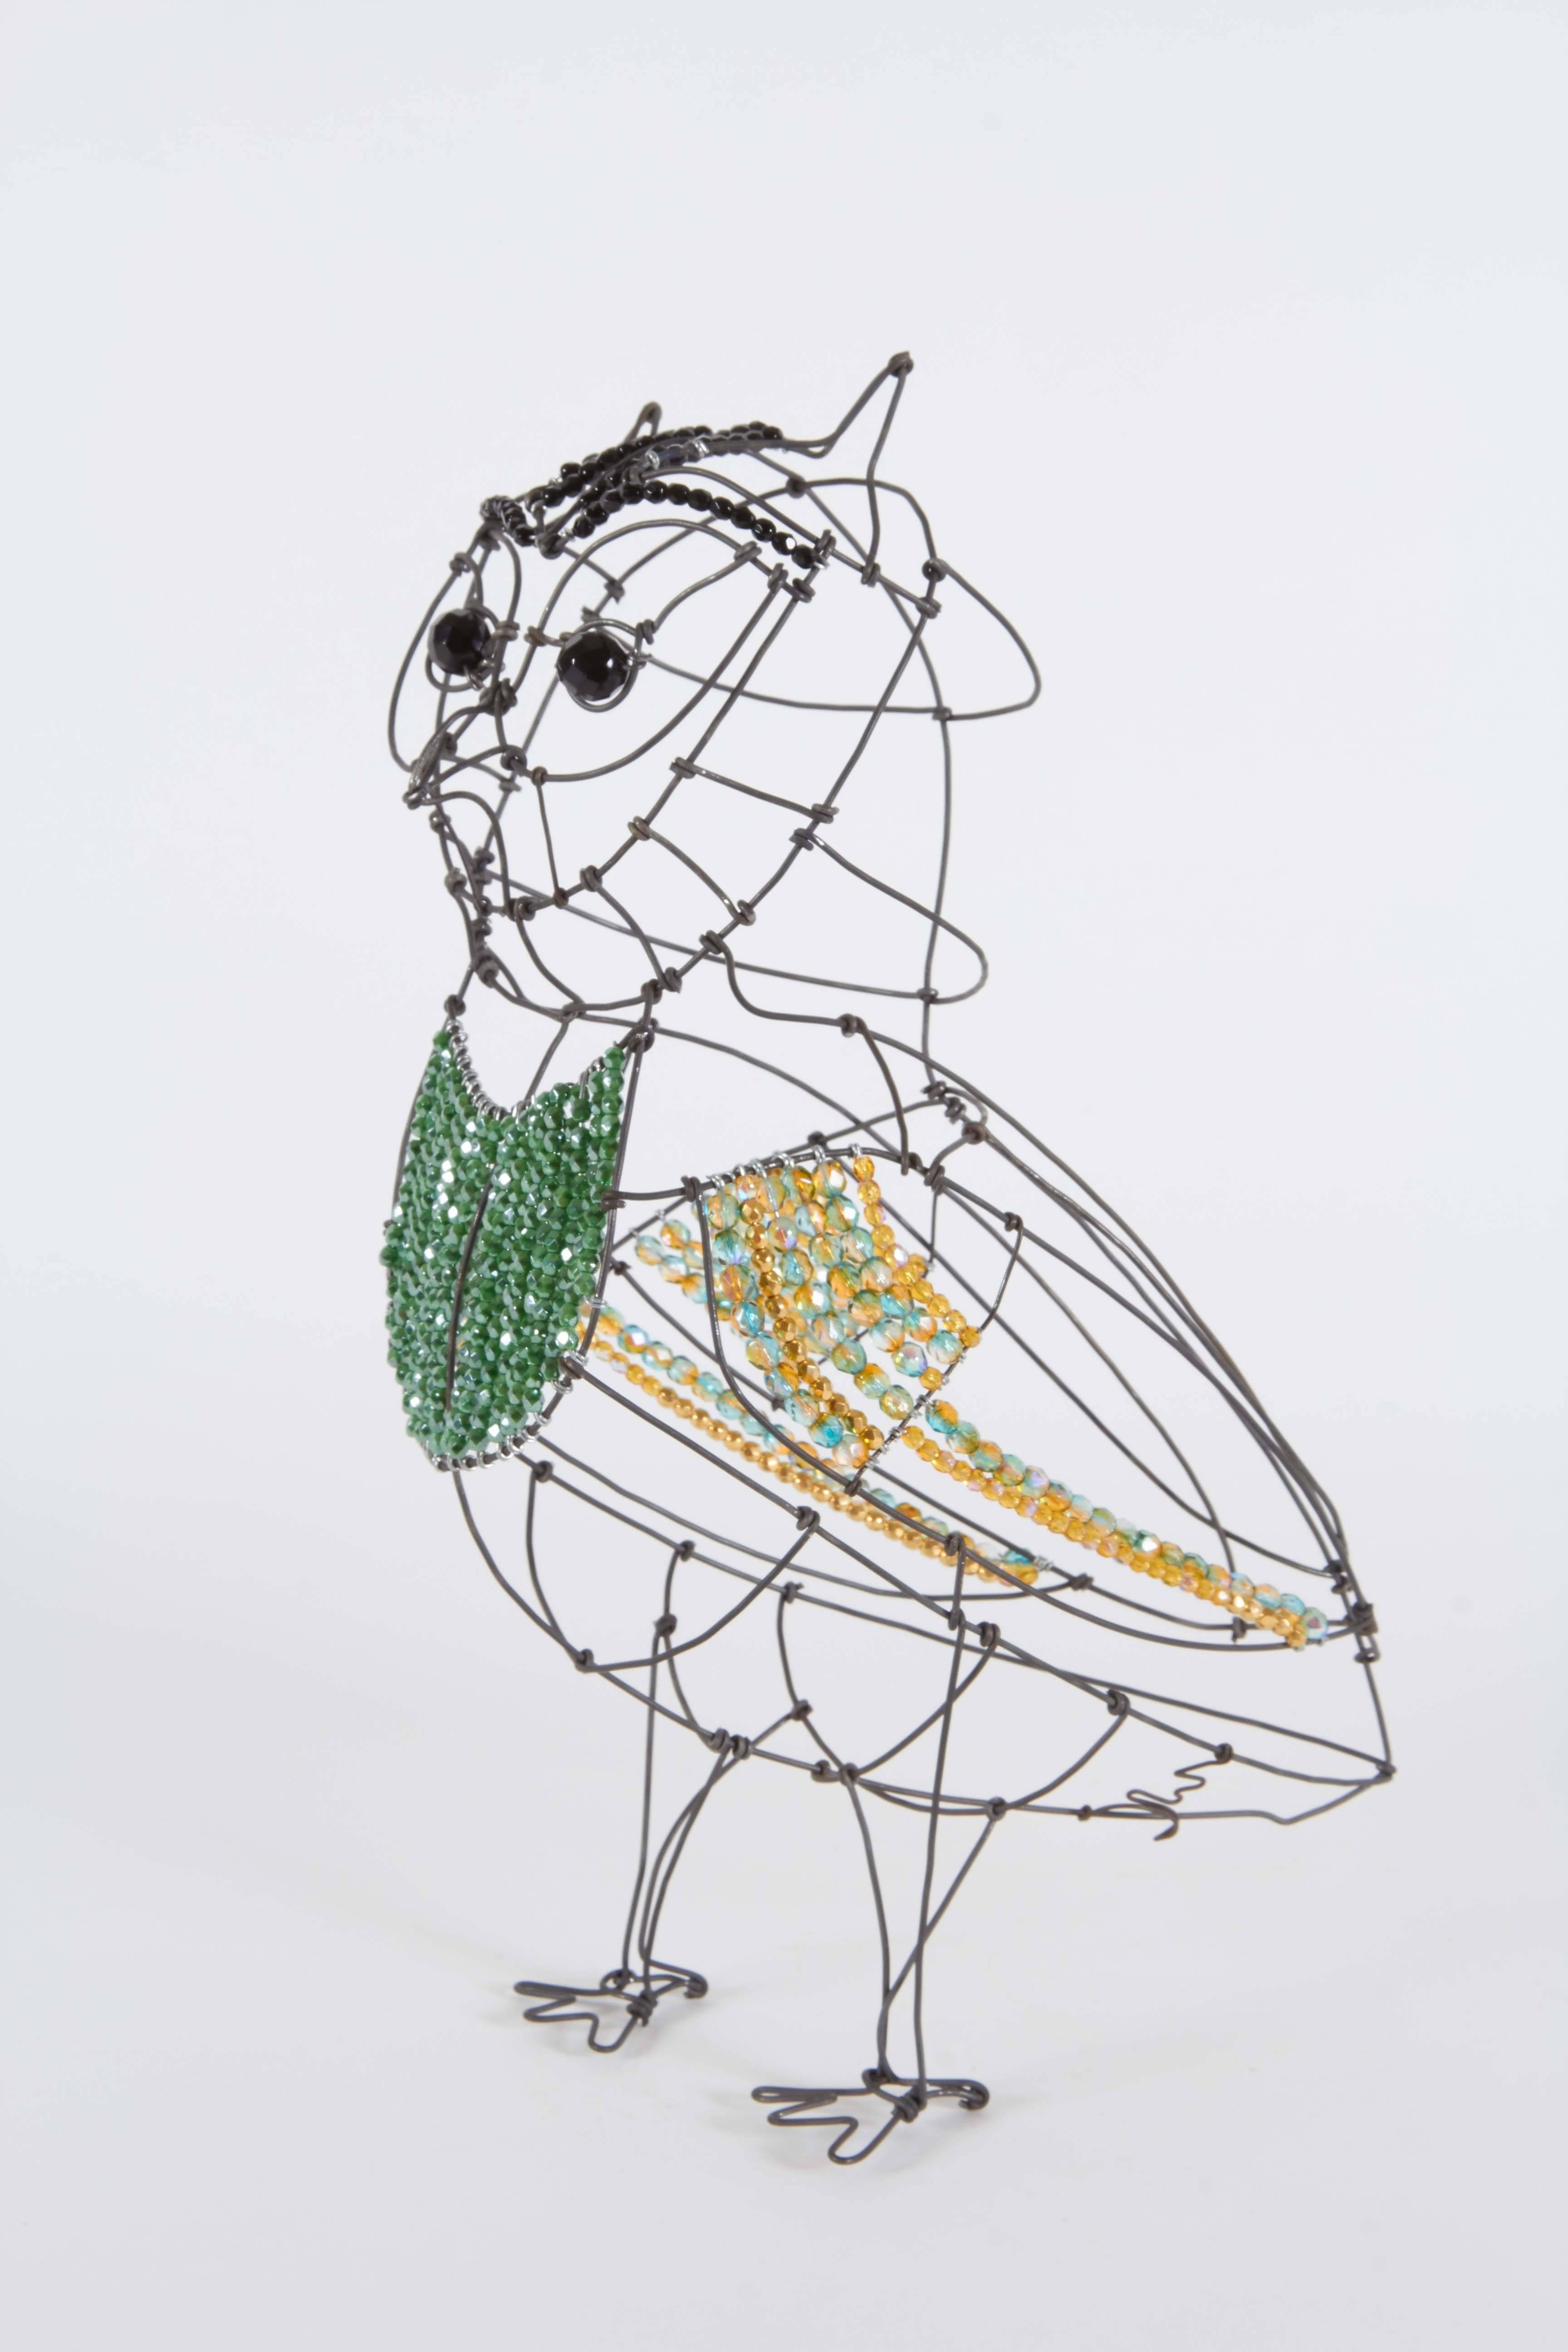 Marie Christophe designs whimsical wirework figurines. They are as light as air and as transparent as bubbles in a champagne glass. Marie’s sculptures of wire and beads are objects of beauty and centerpieces of any space they find their home. Marie